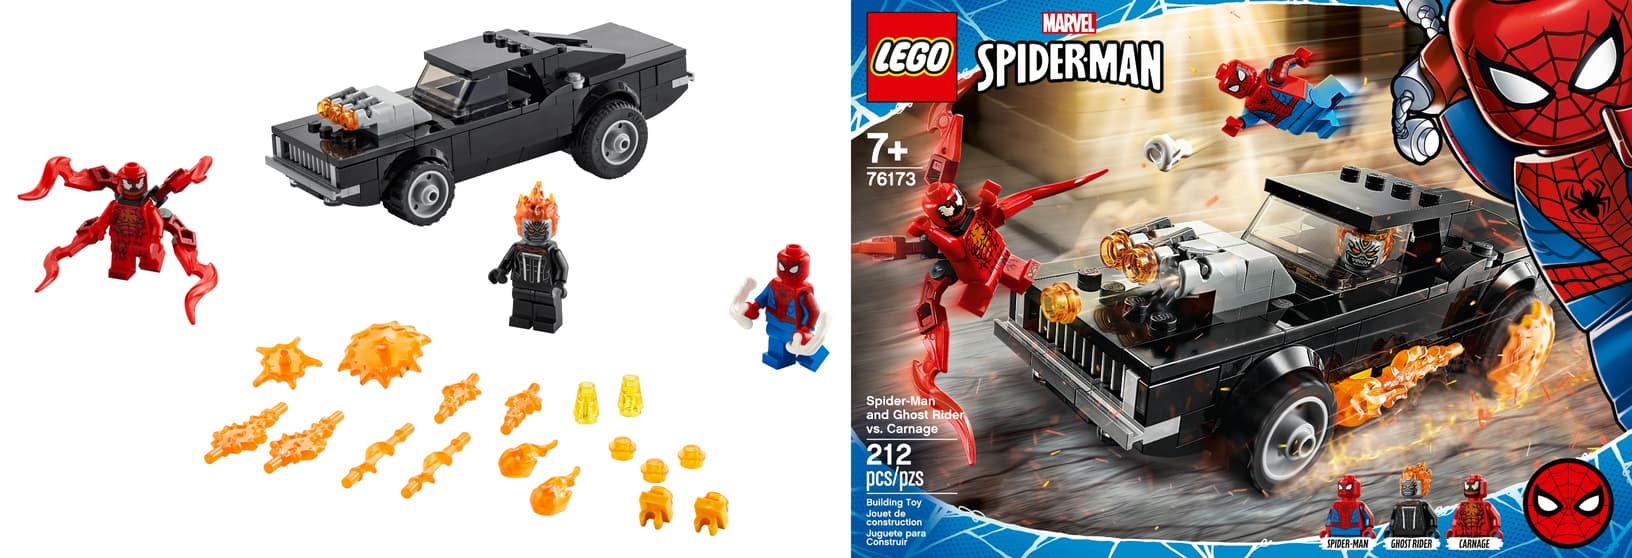 Venom Carnage LEGO sets both open and both complete!